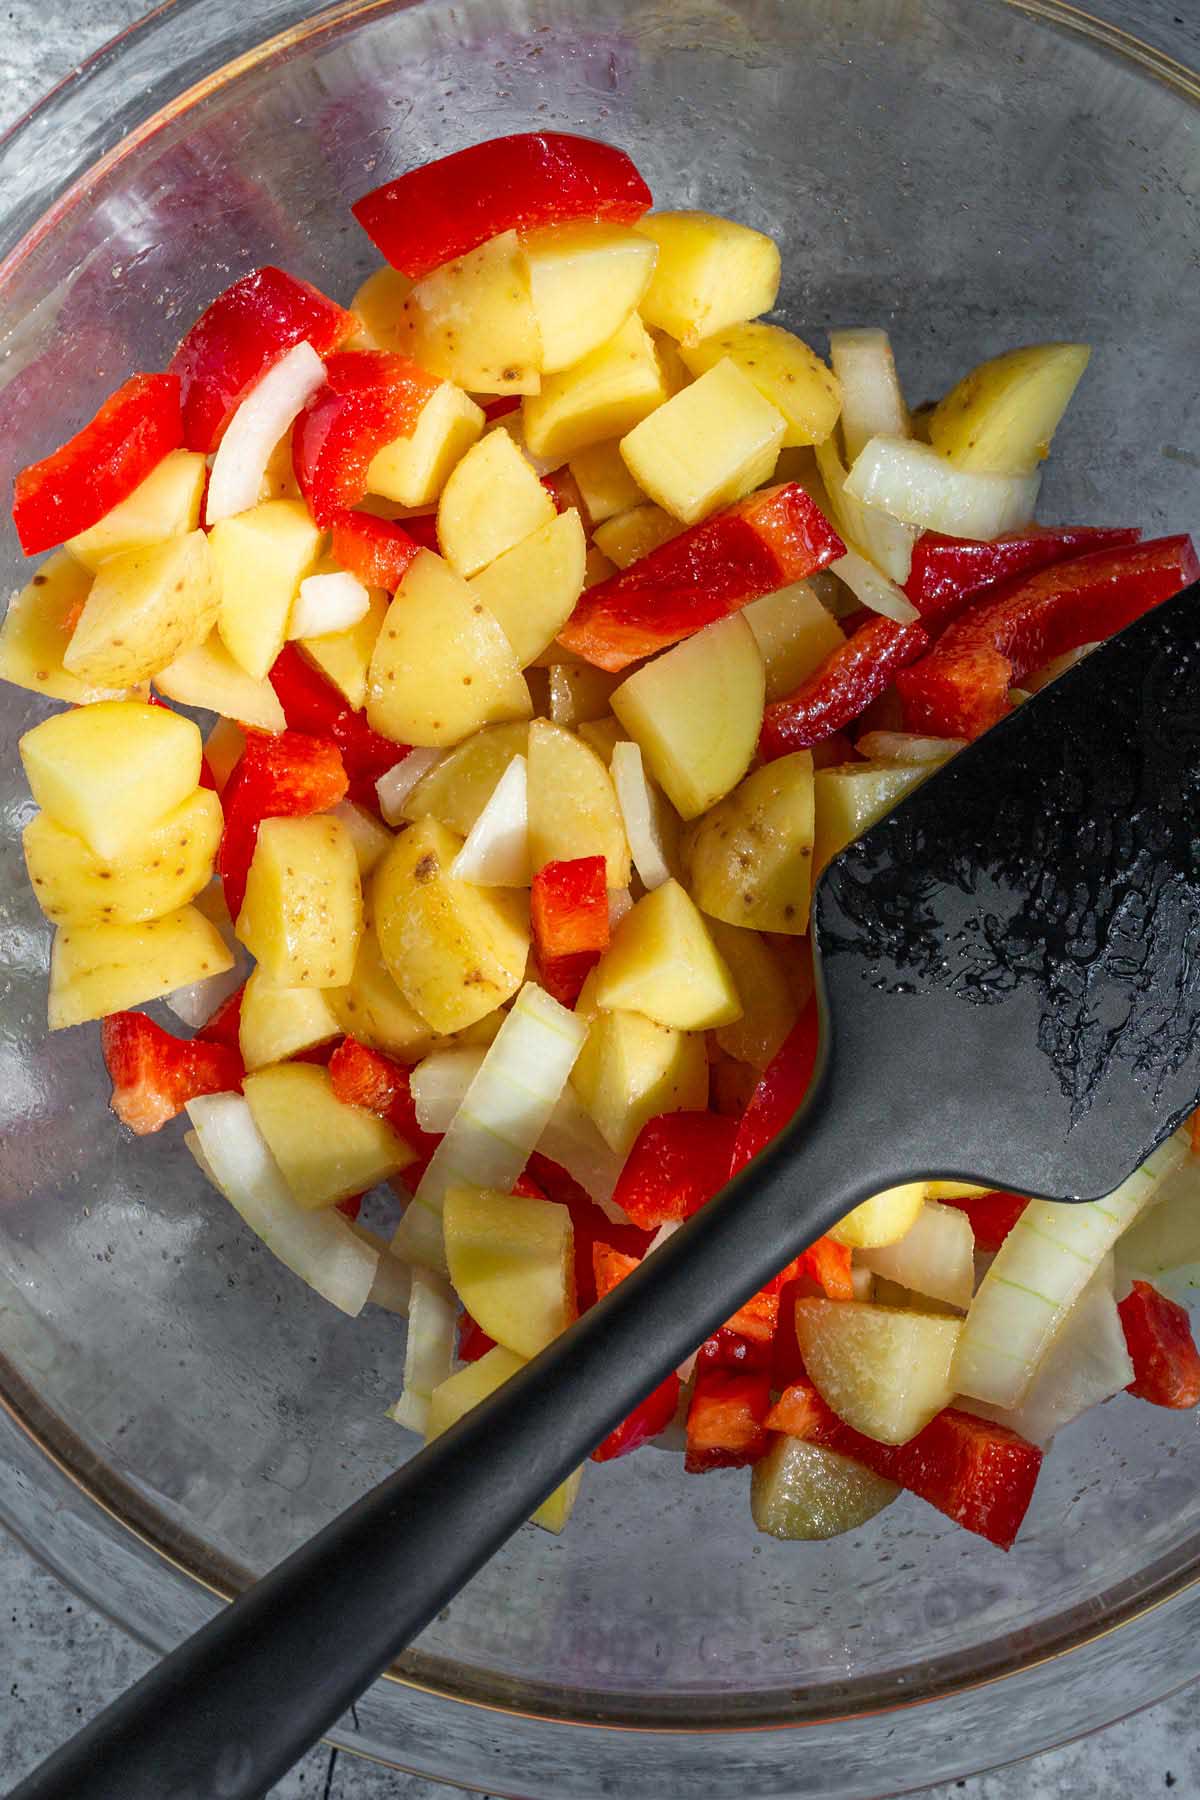 Potatoes, onions, and peppers in a glass bowl.